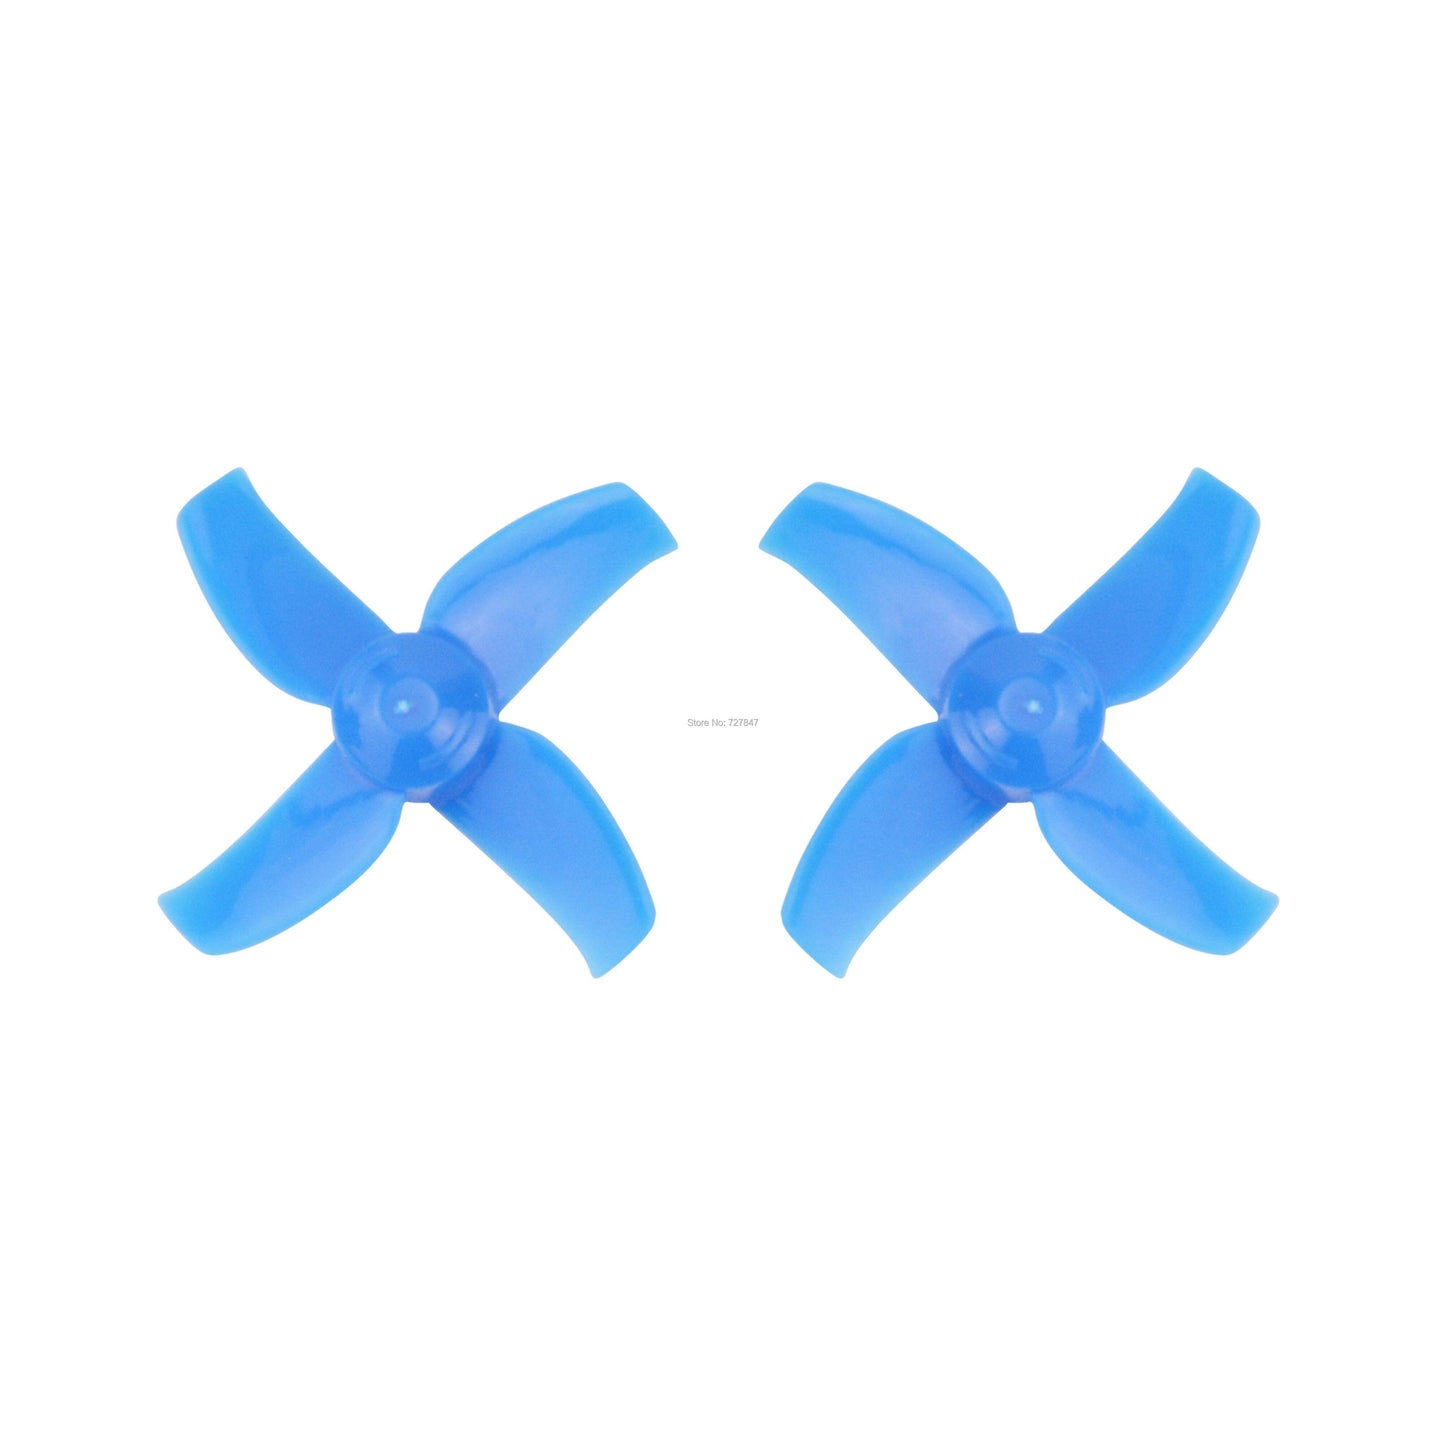 4-Paddle PC Propellers - 10Pairs/lot 40 40mm 1.0mm Hole CW CCW Props for Mobula7 Mobula 7 FPV Racing Drone Quadcopter - RCDrone